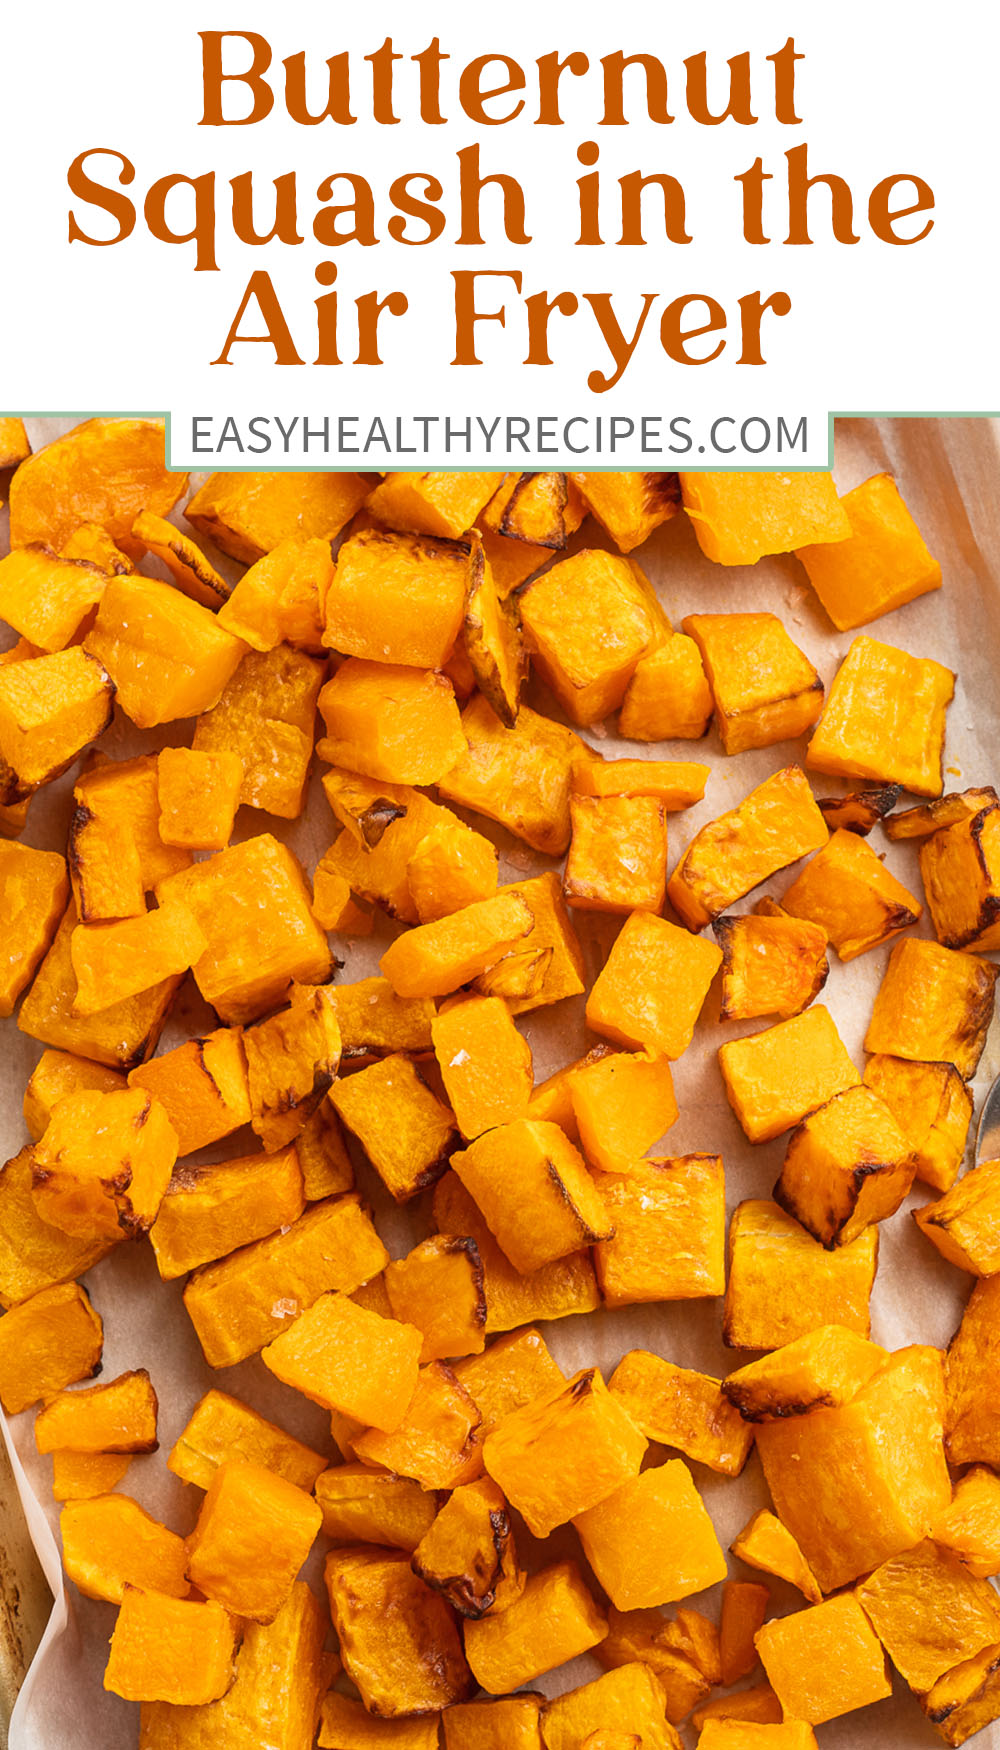 Pin graphic for air fryer butternut squash.